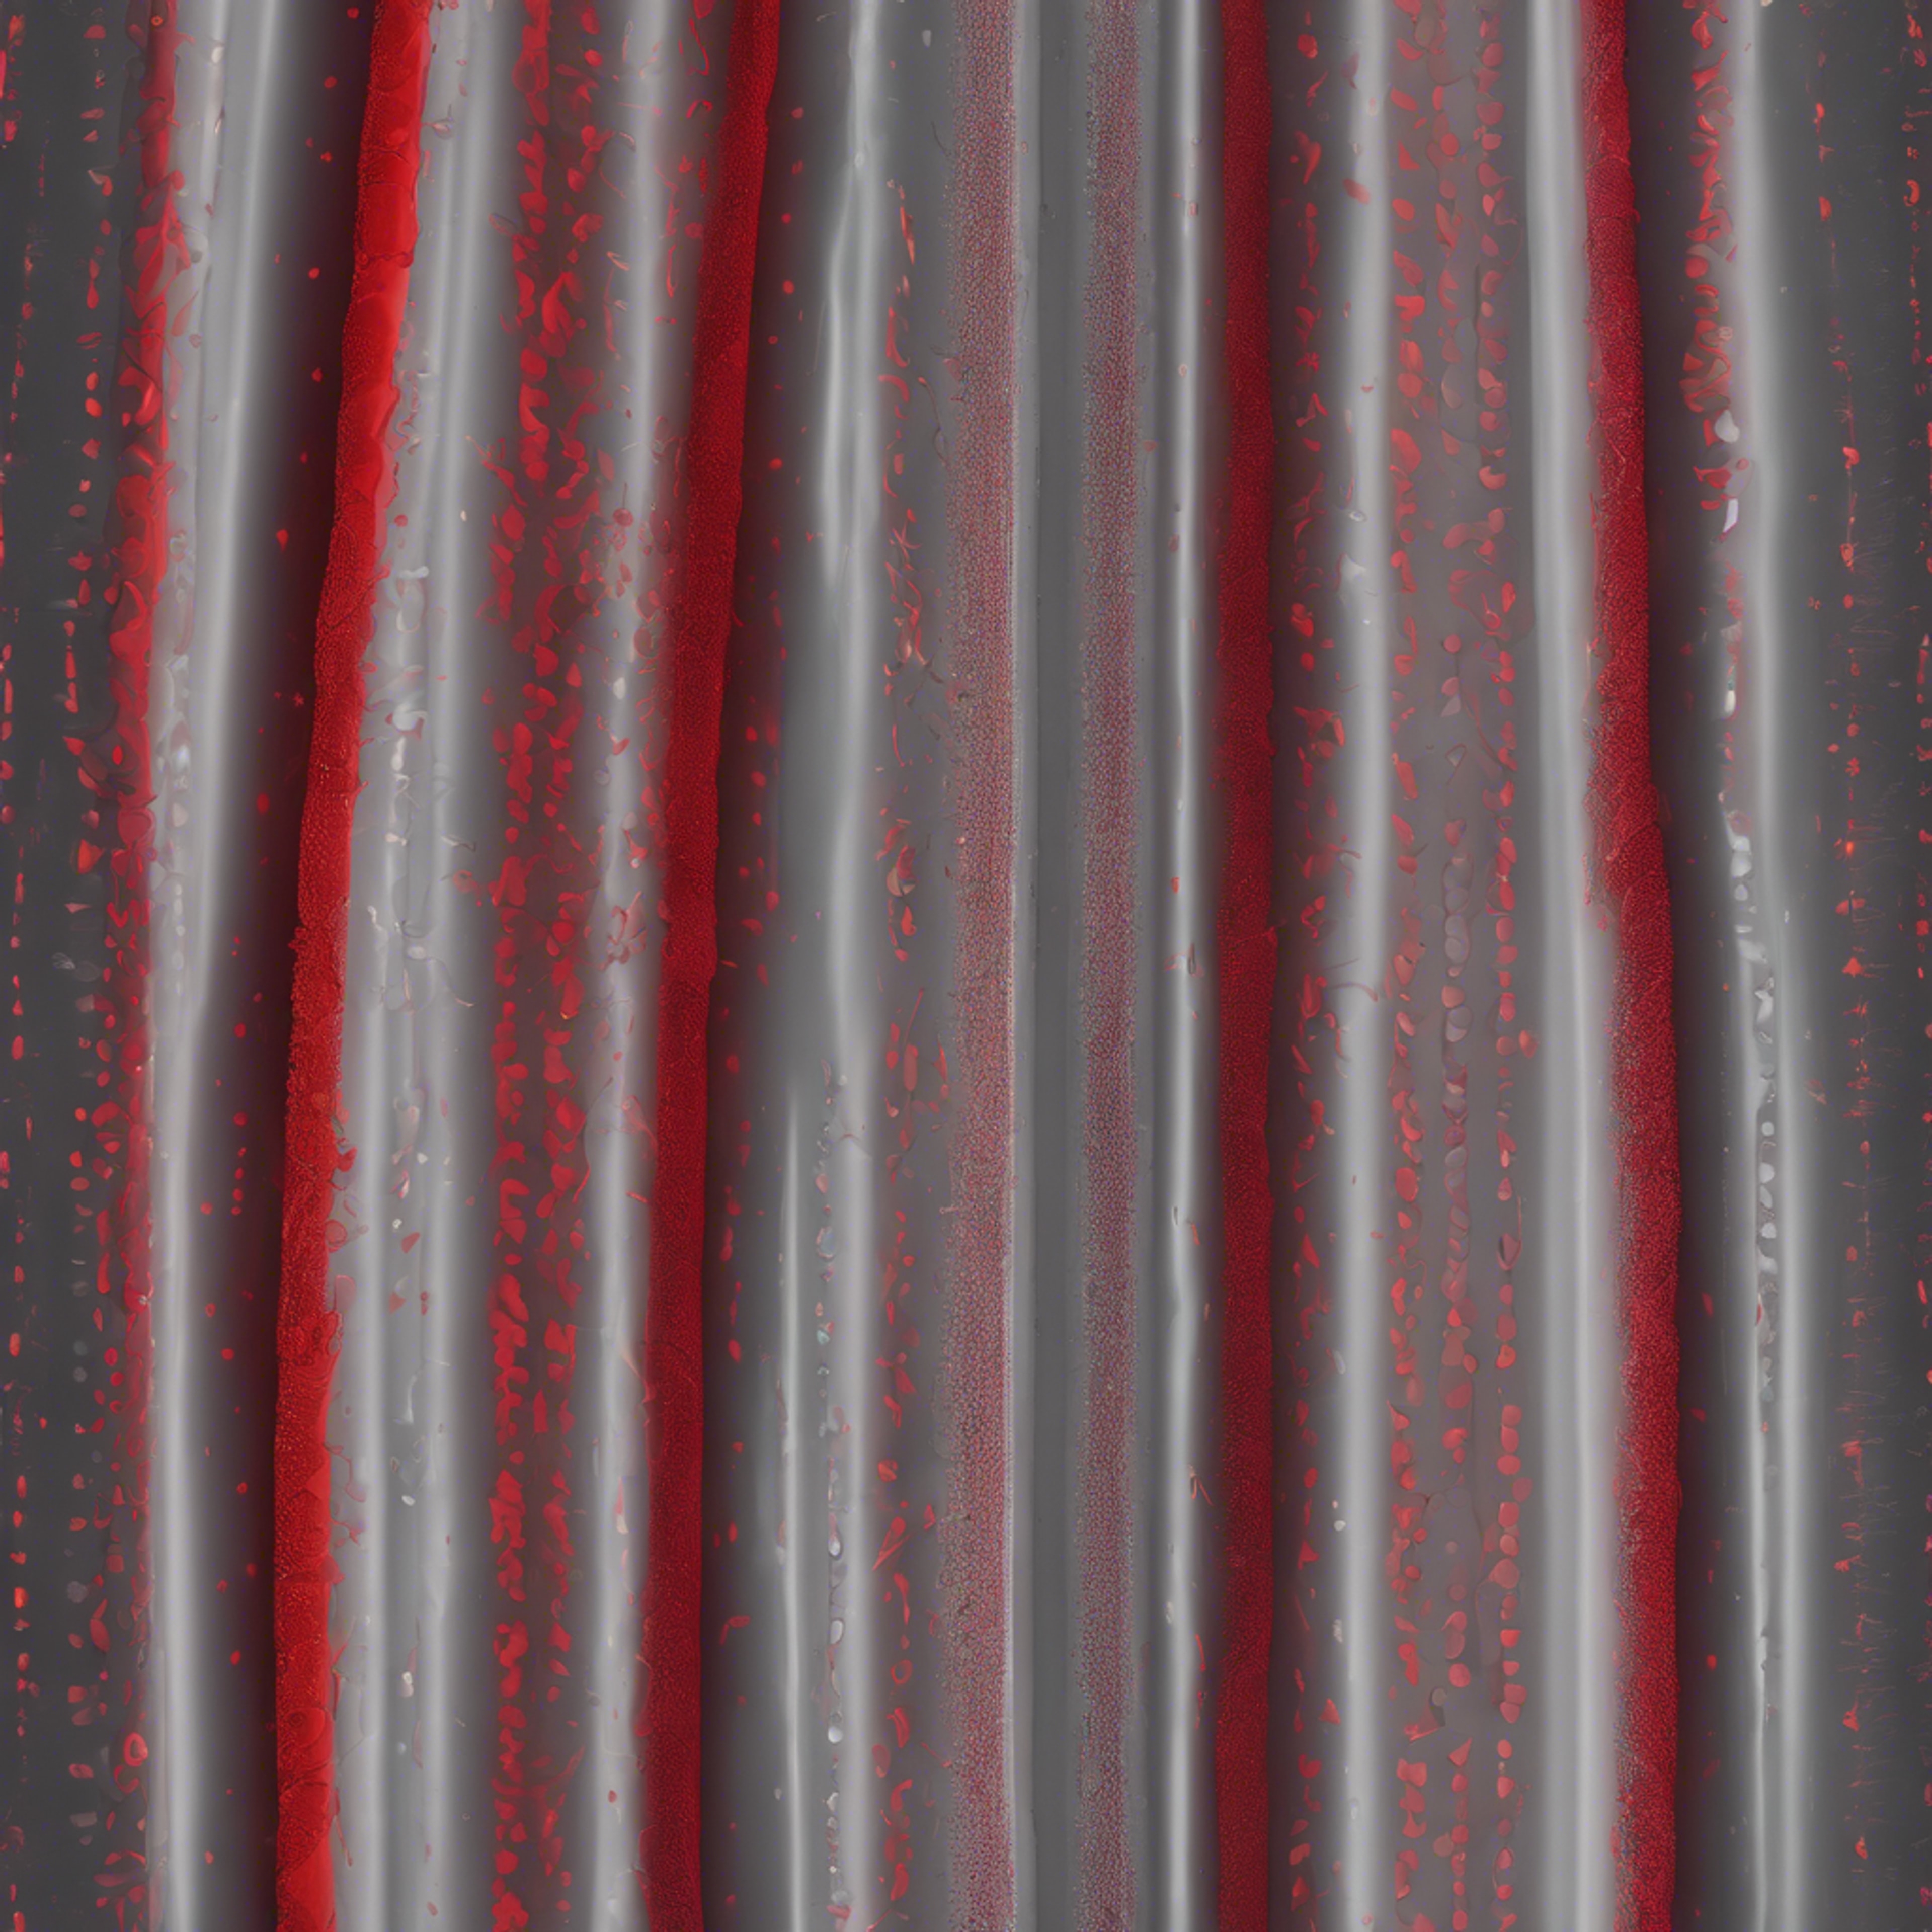 An abstract pattern with hallucinogenic red and grey gradients blending into each other. Wallpaper[5c97b162f4f748b39a07]